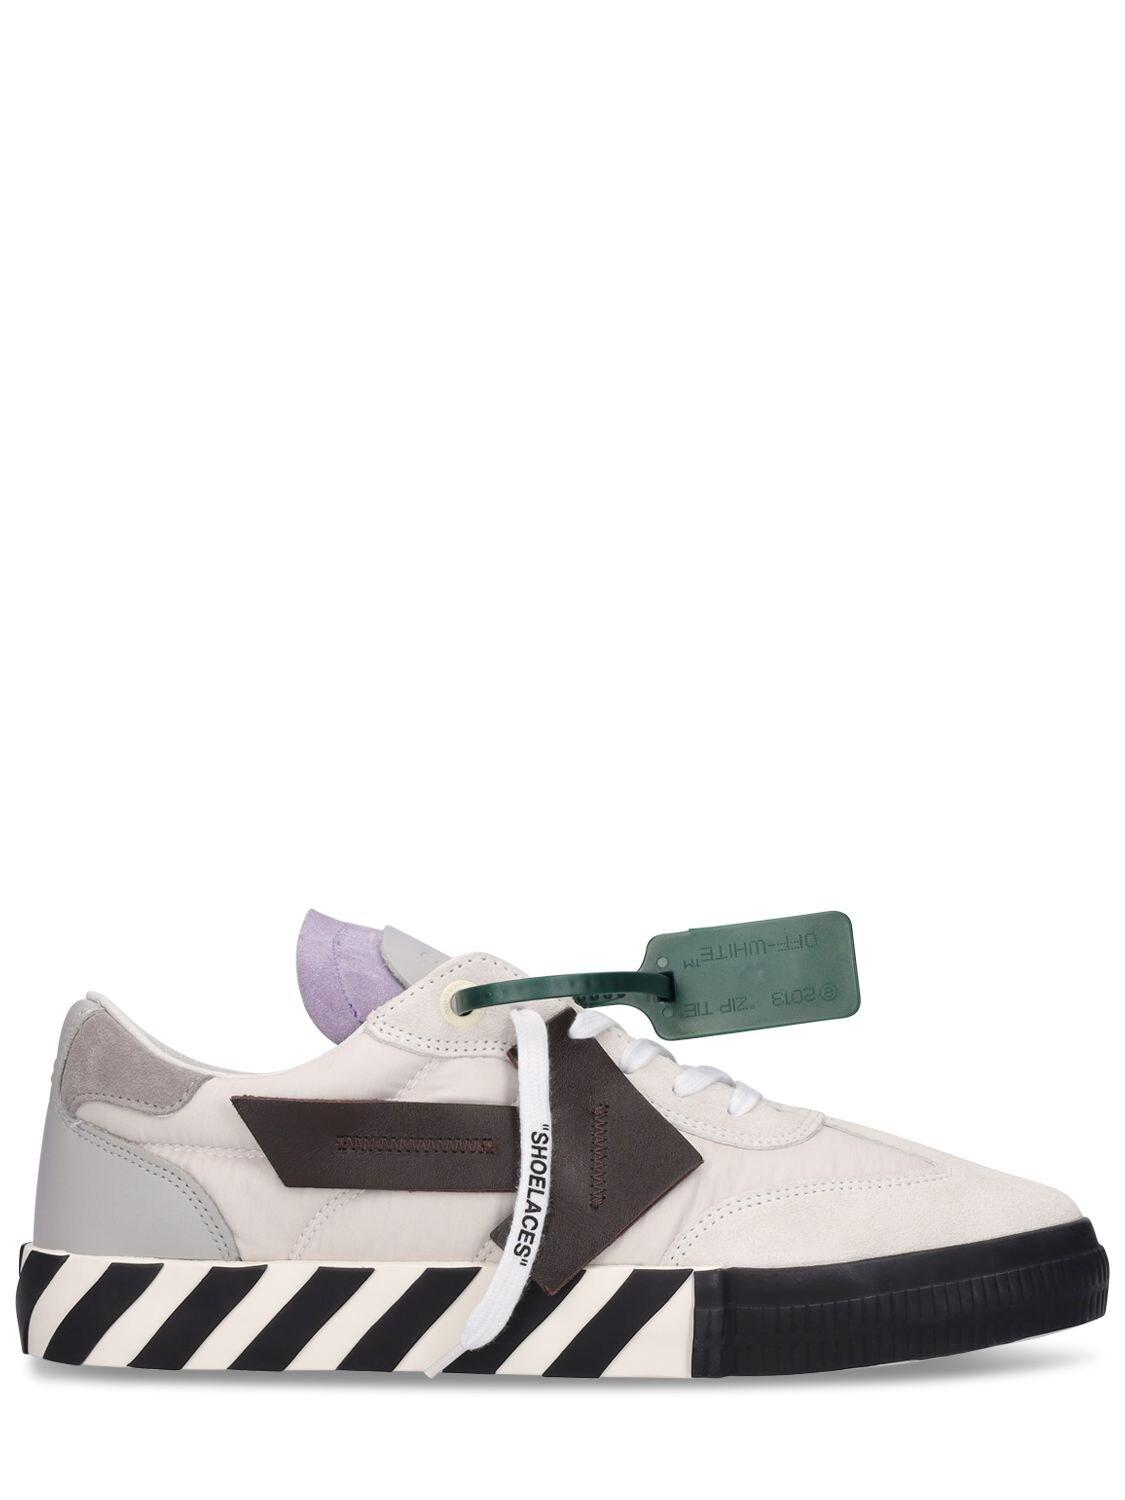 Off-White c/o Virgil Abloh Arrow Low Vulcanized Leather Sneakers in ...